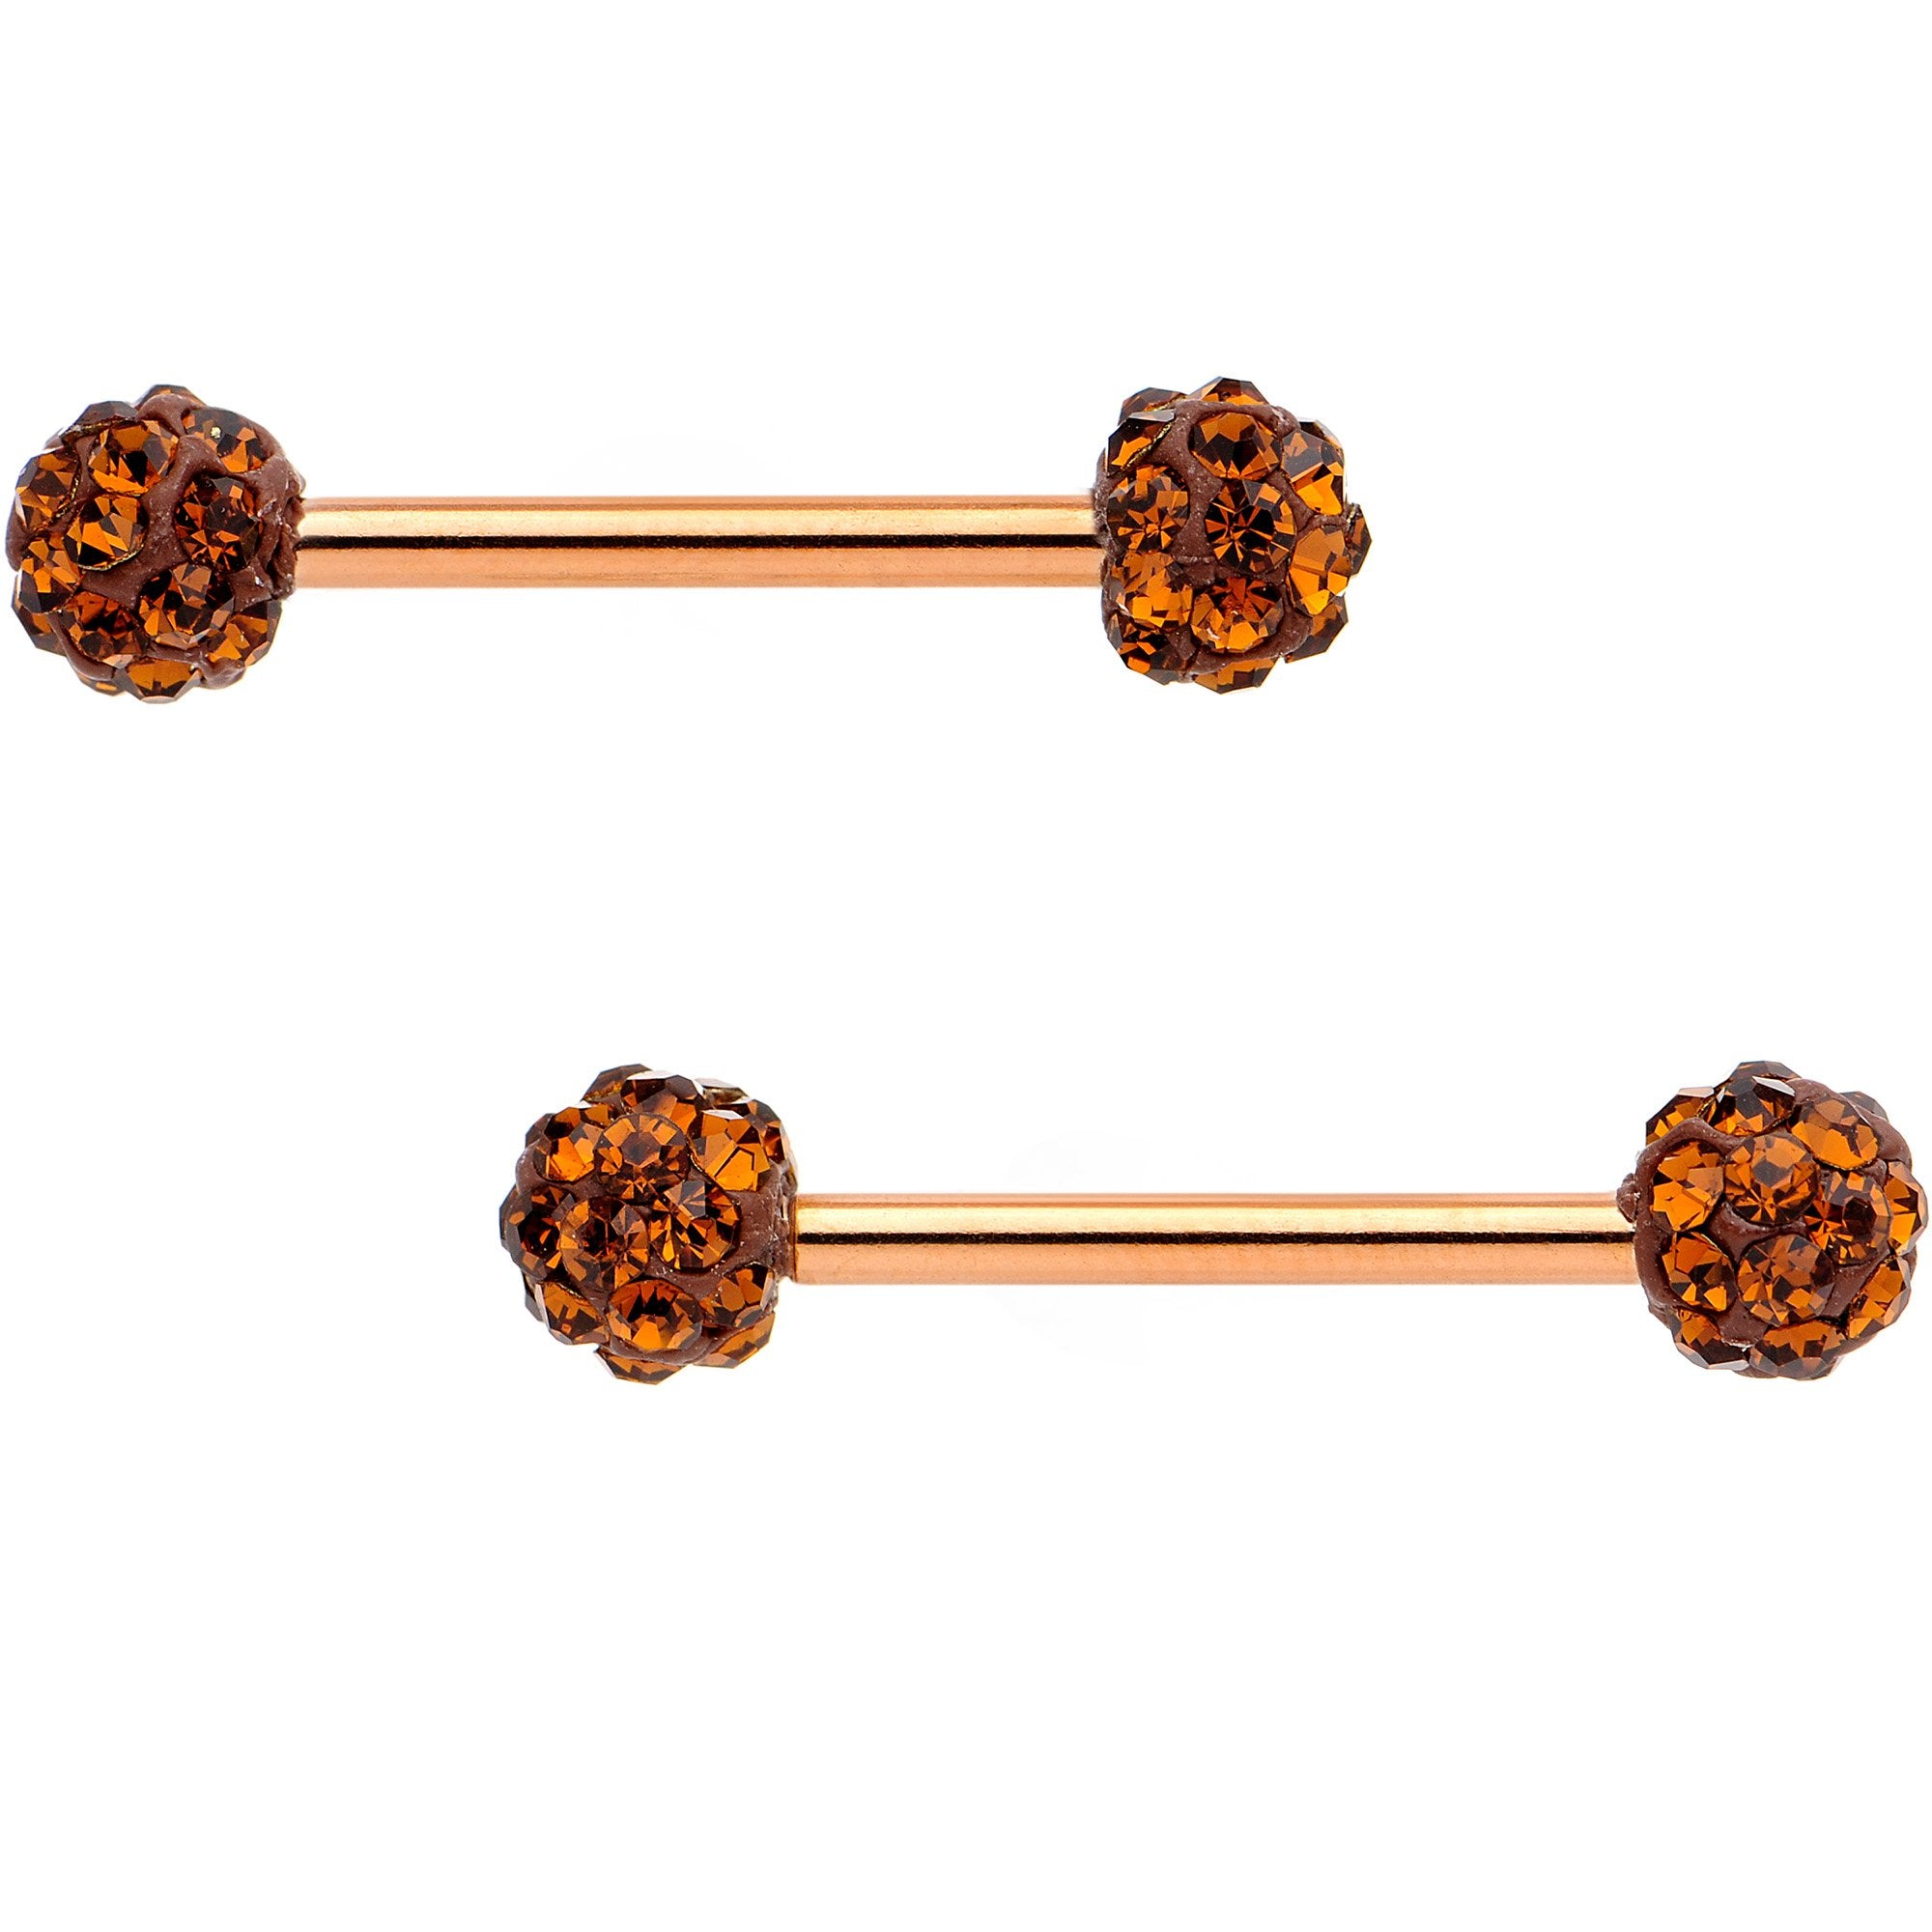 Chocolate Gem Rose Gold Tone Anodized Sparkle Barbell Nipple Ring Set